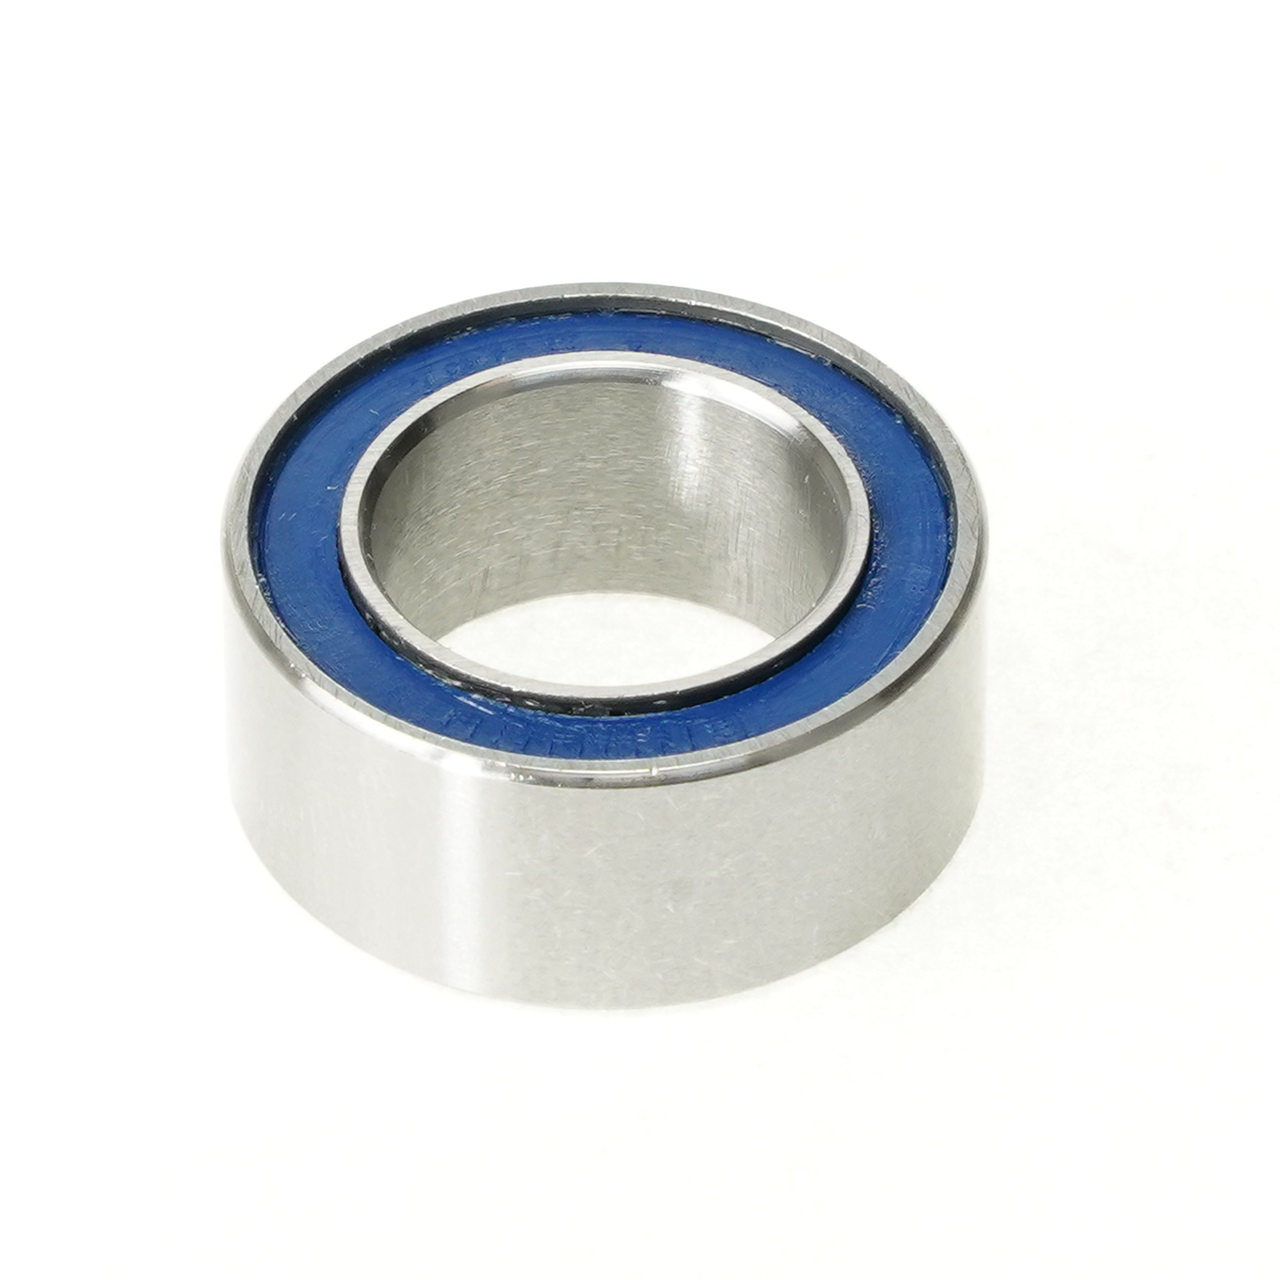 Enduro DR 152610 LLB - ABEC-3, Double-Row, Radial Bearing (C3 Clearance) - 15mm x 26mm x 10mm